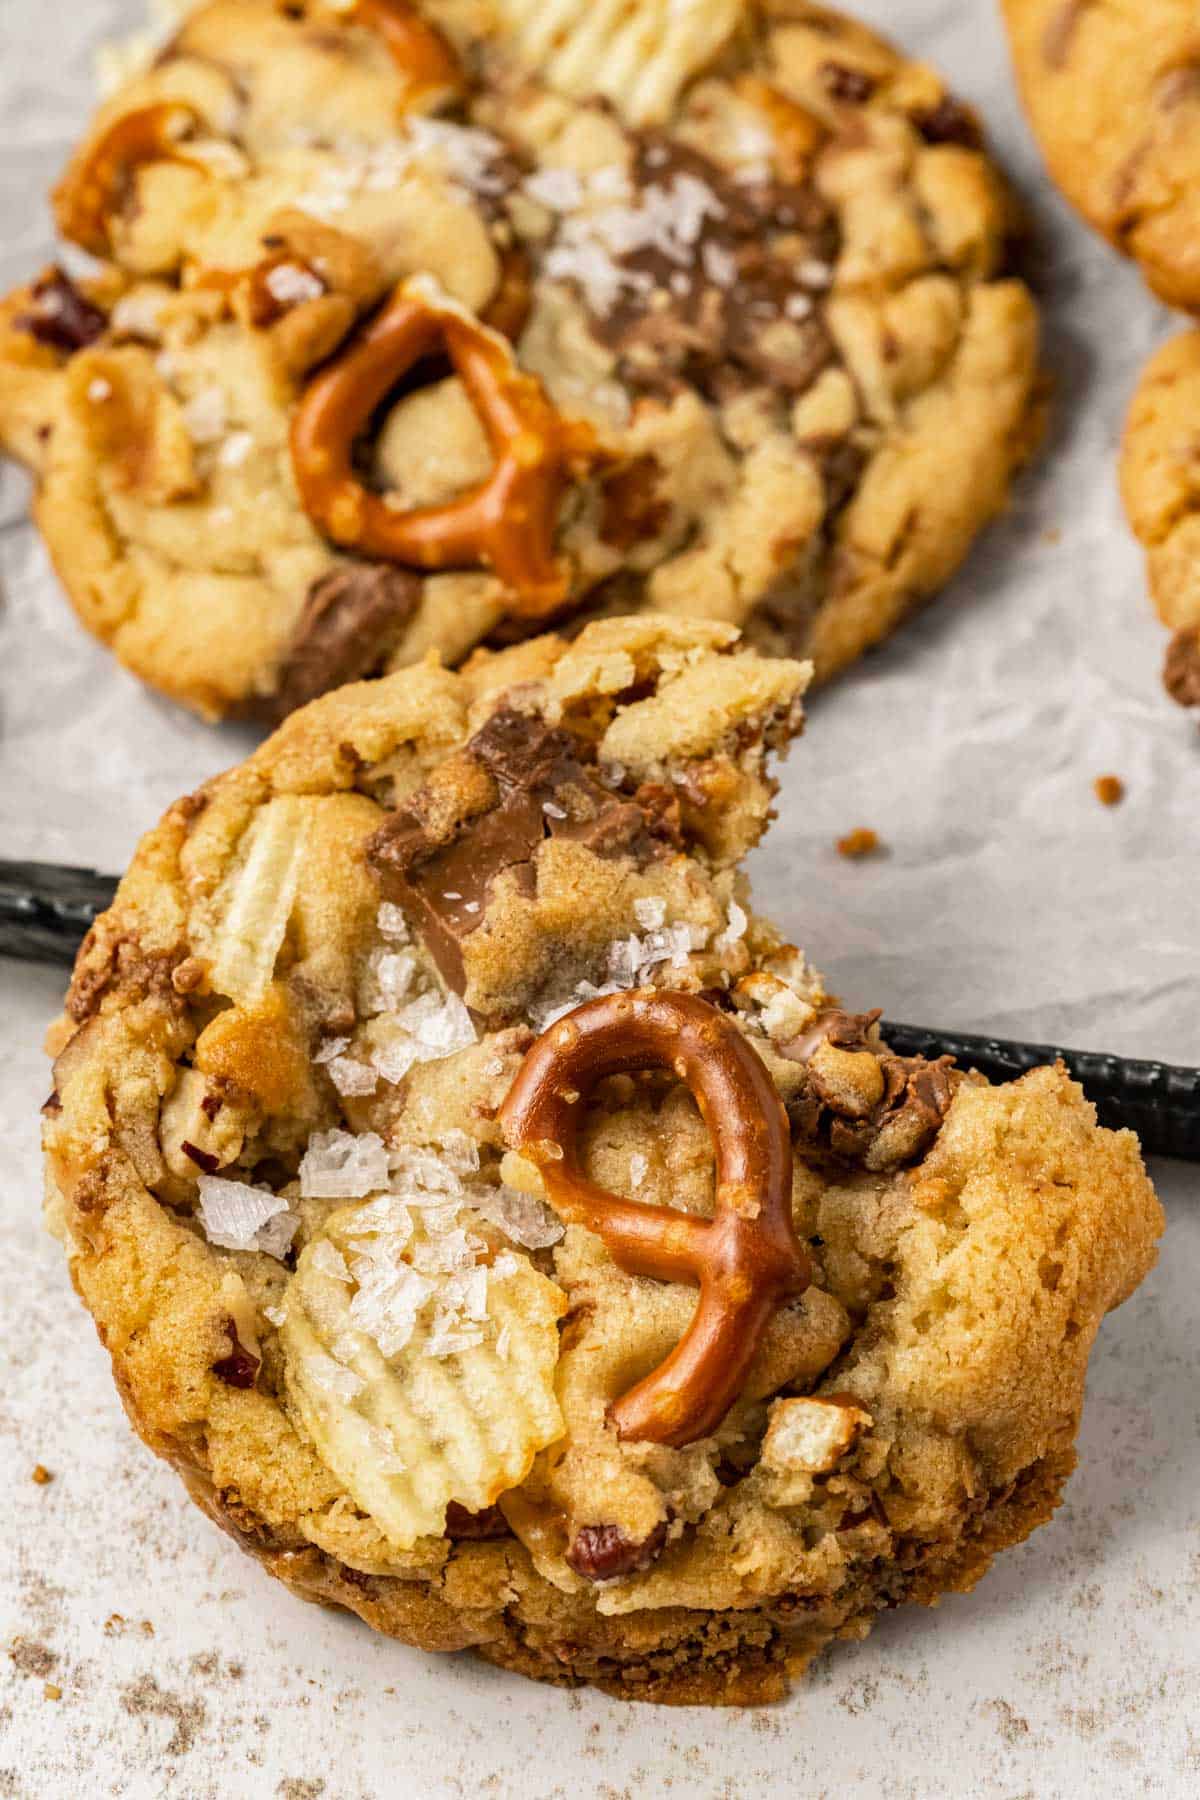 close up of a kitchen sink cookie with a bite taken out, leaning on a sheet pan with more kitchen sink cookies on it